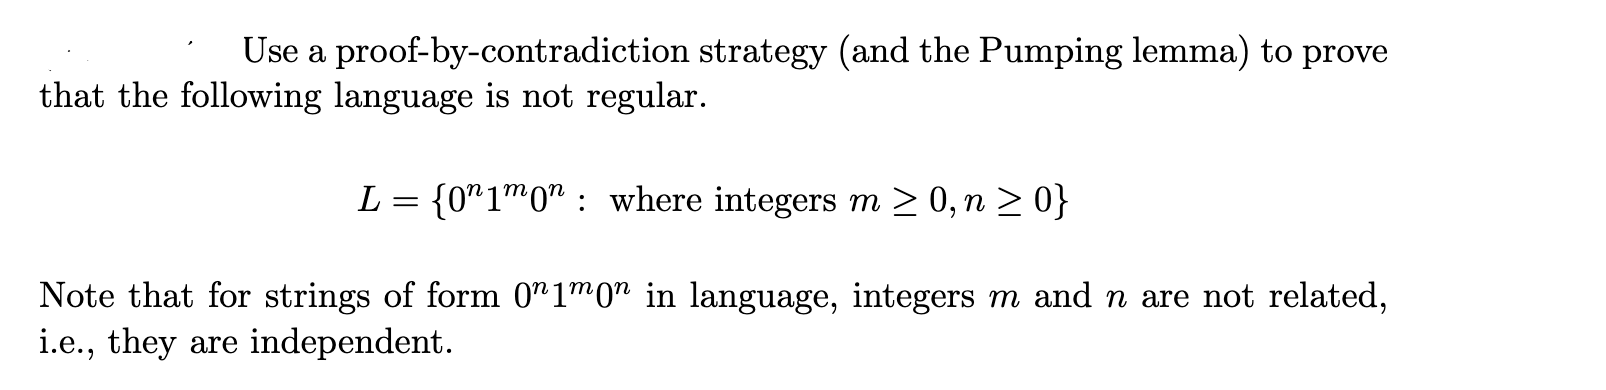 Use a proof-by-contradiction strategy (and the Pumping lemma) to prove
that the following language is not regular.
L = {0"1™0" : where integers m > 0, n > 0}
Note that for strings of form 0"1™0" in language, integers m and n are not related,
i.e., they are independent.
